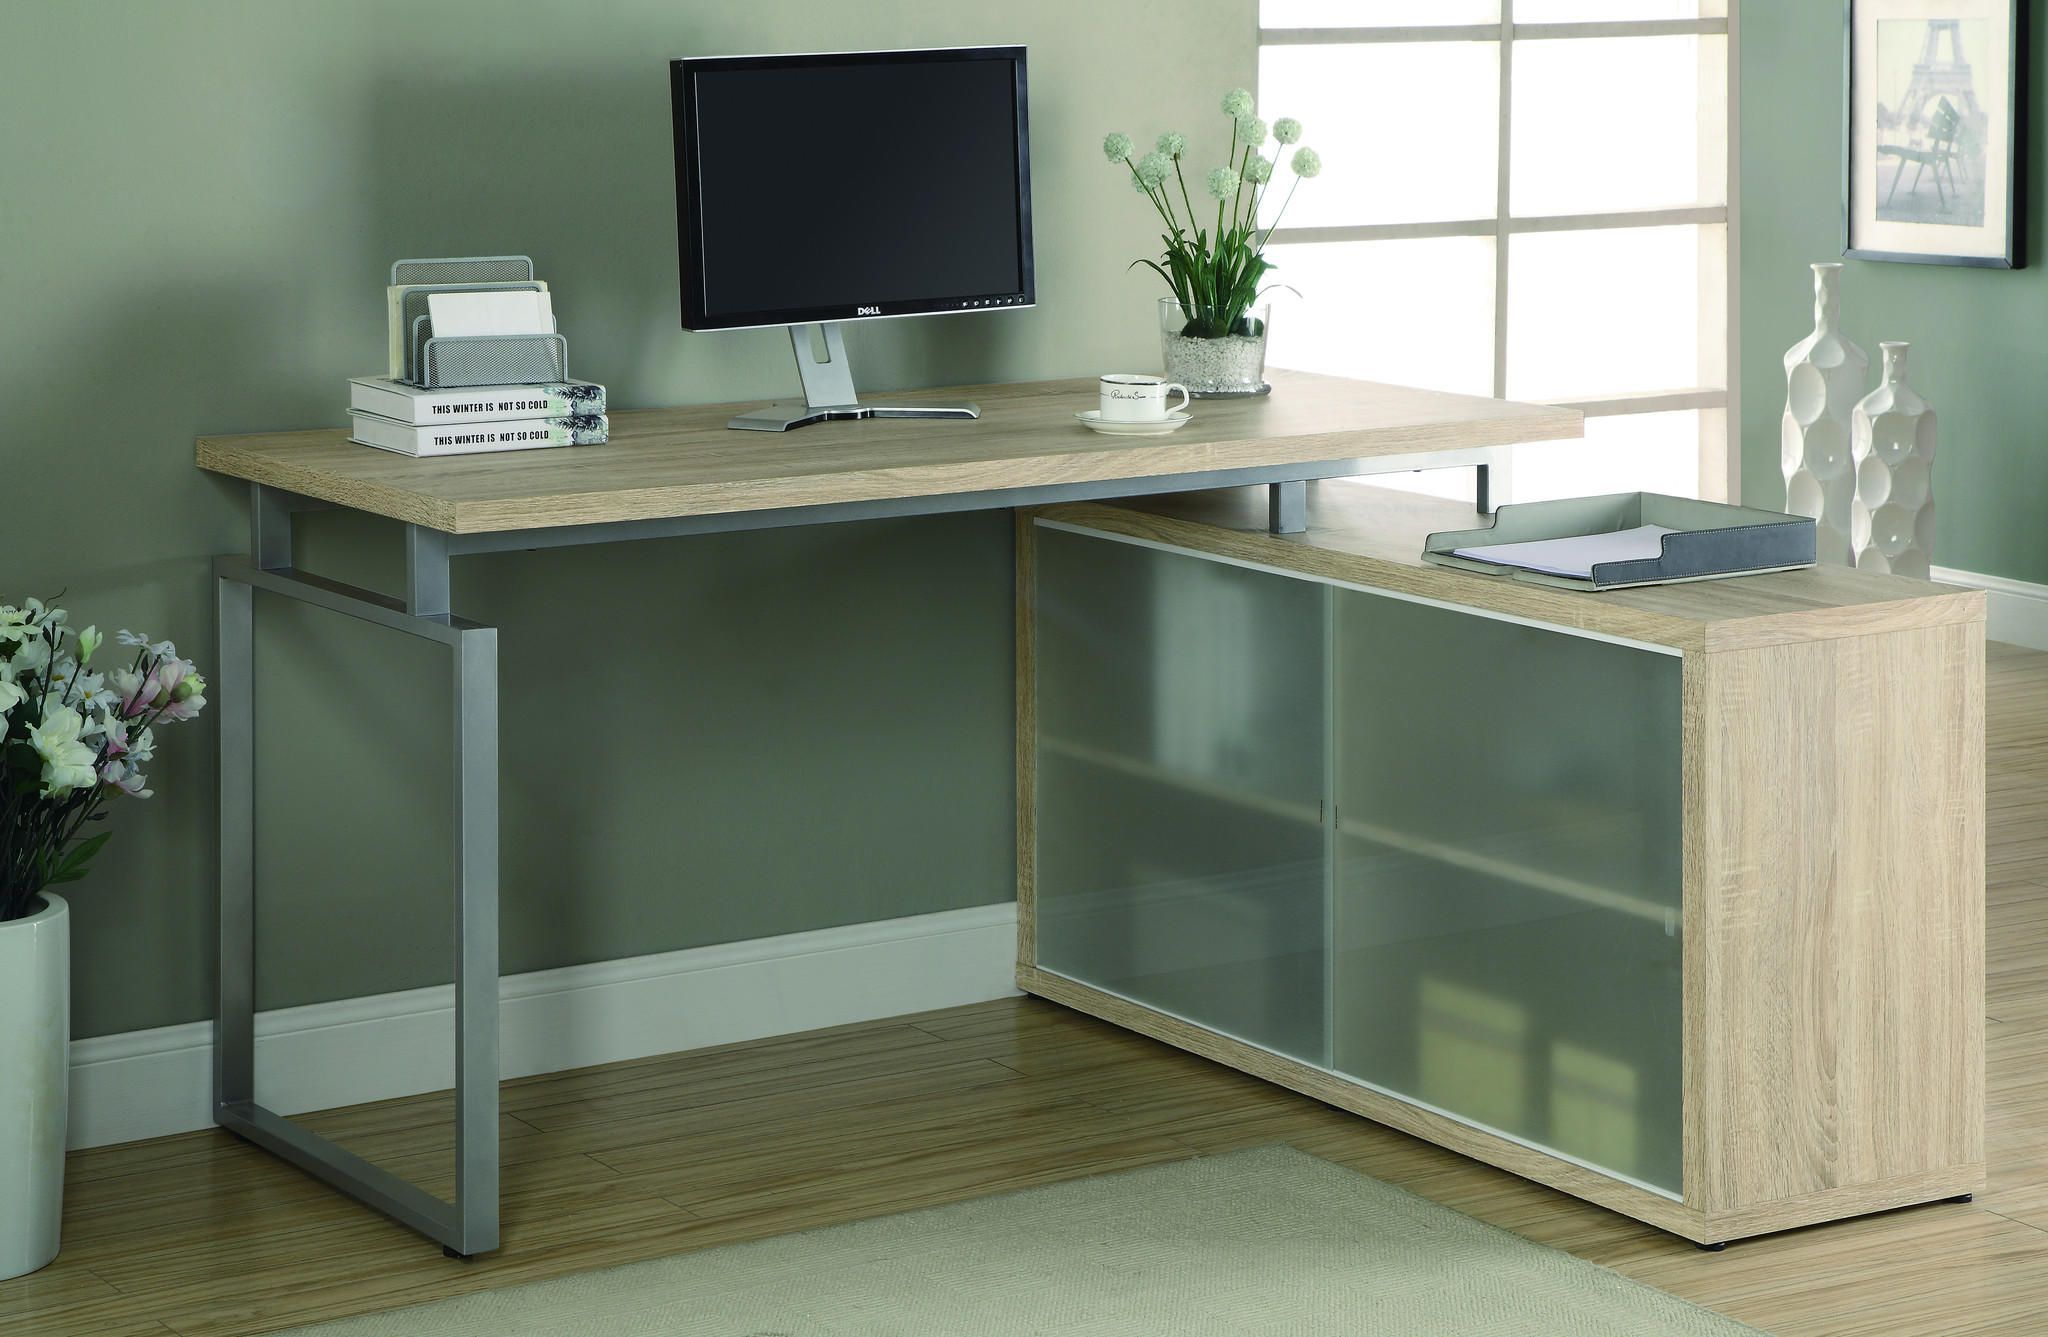 Natural Reclaimed Look "l" Shaped Desk With Frosted Glass | L Shaped Inside Aluminum And Frosted Glass Desks (View 7 of 15)